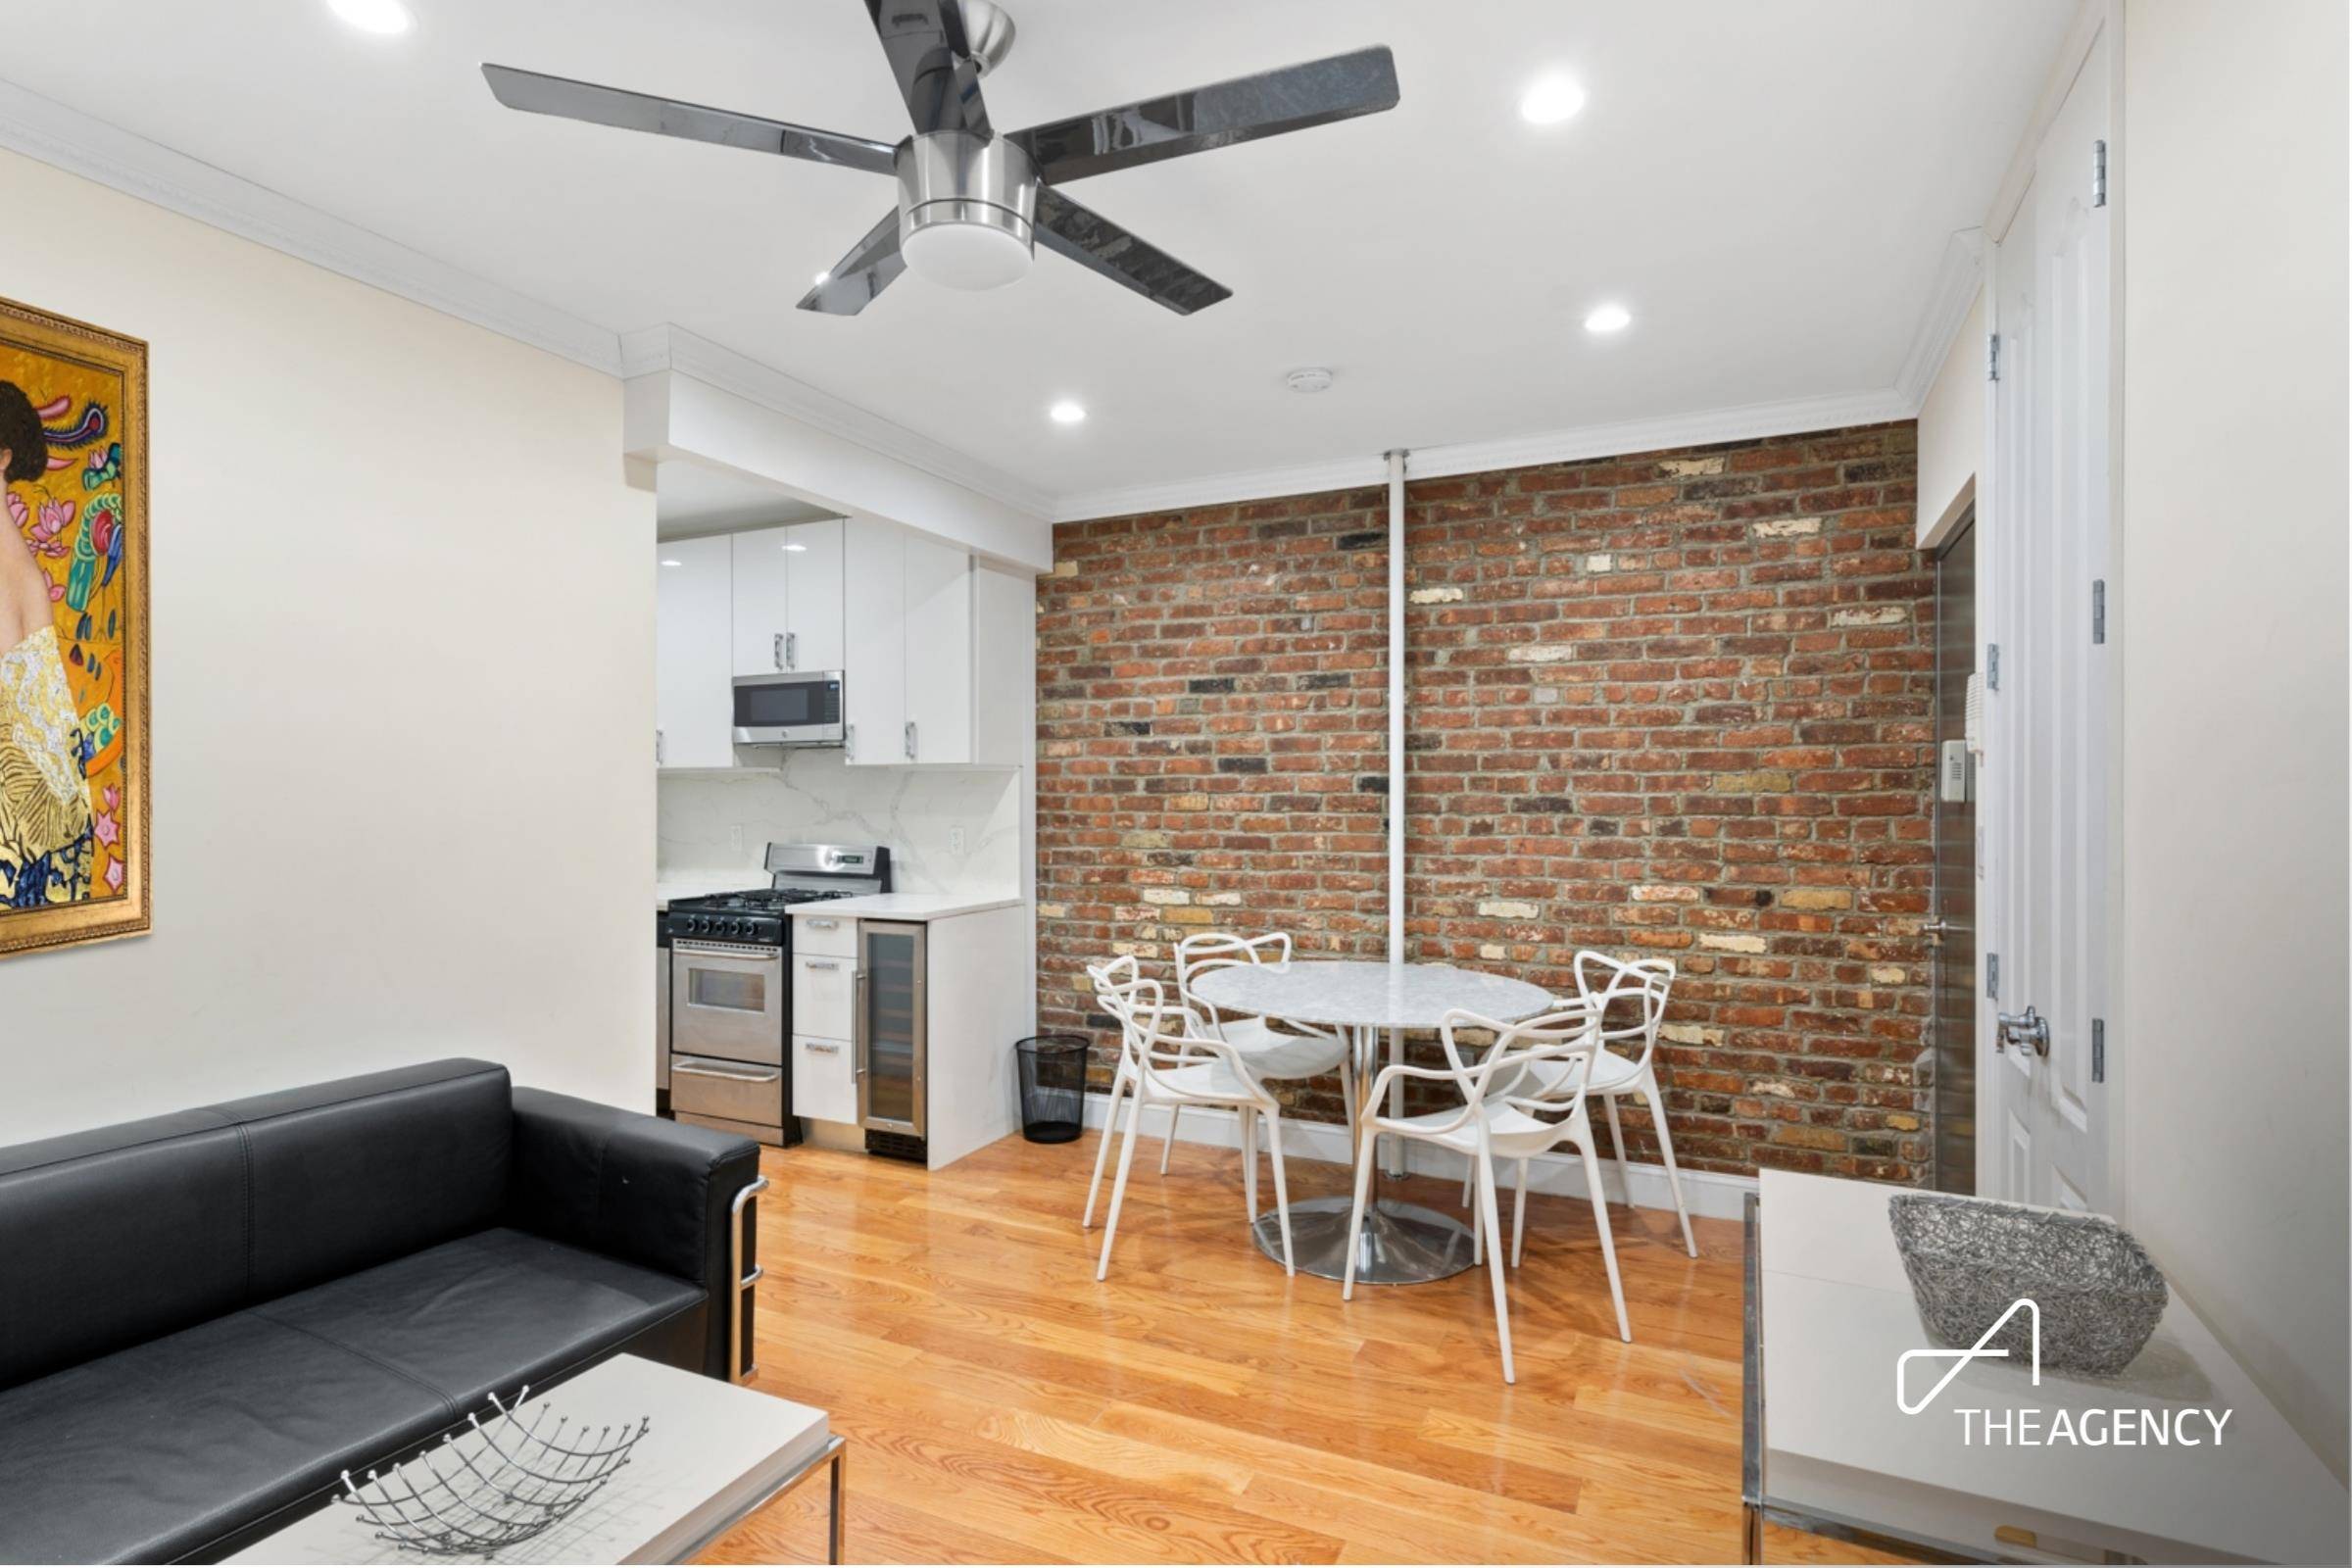 3 Bedroom in Nolita with in unit laundryUnit 5 is a stunner of a 3 bedroom, 1.